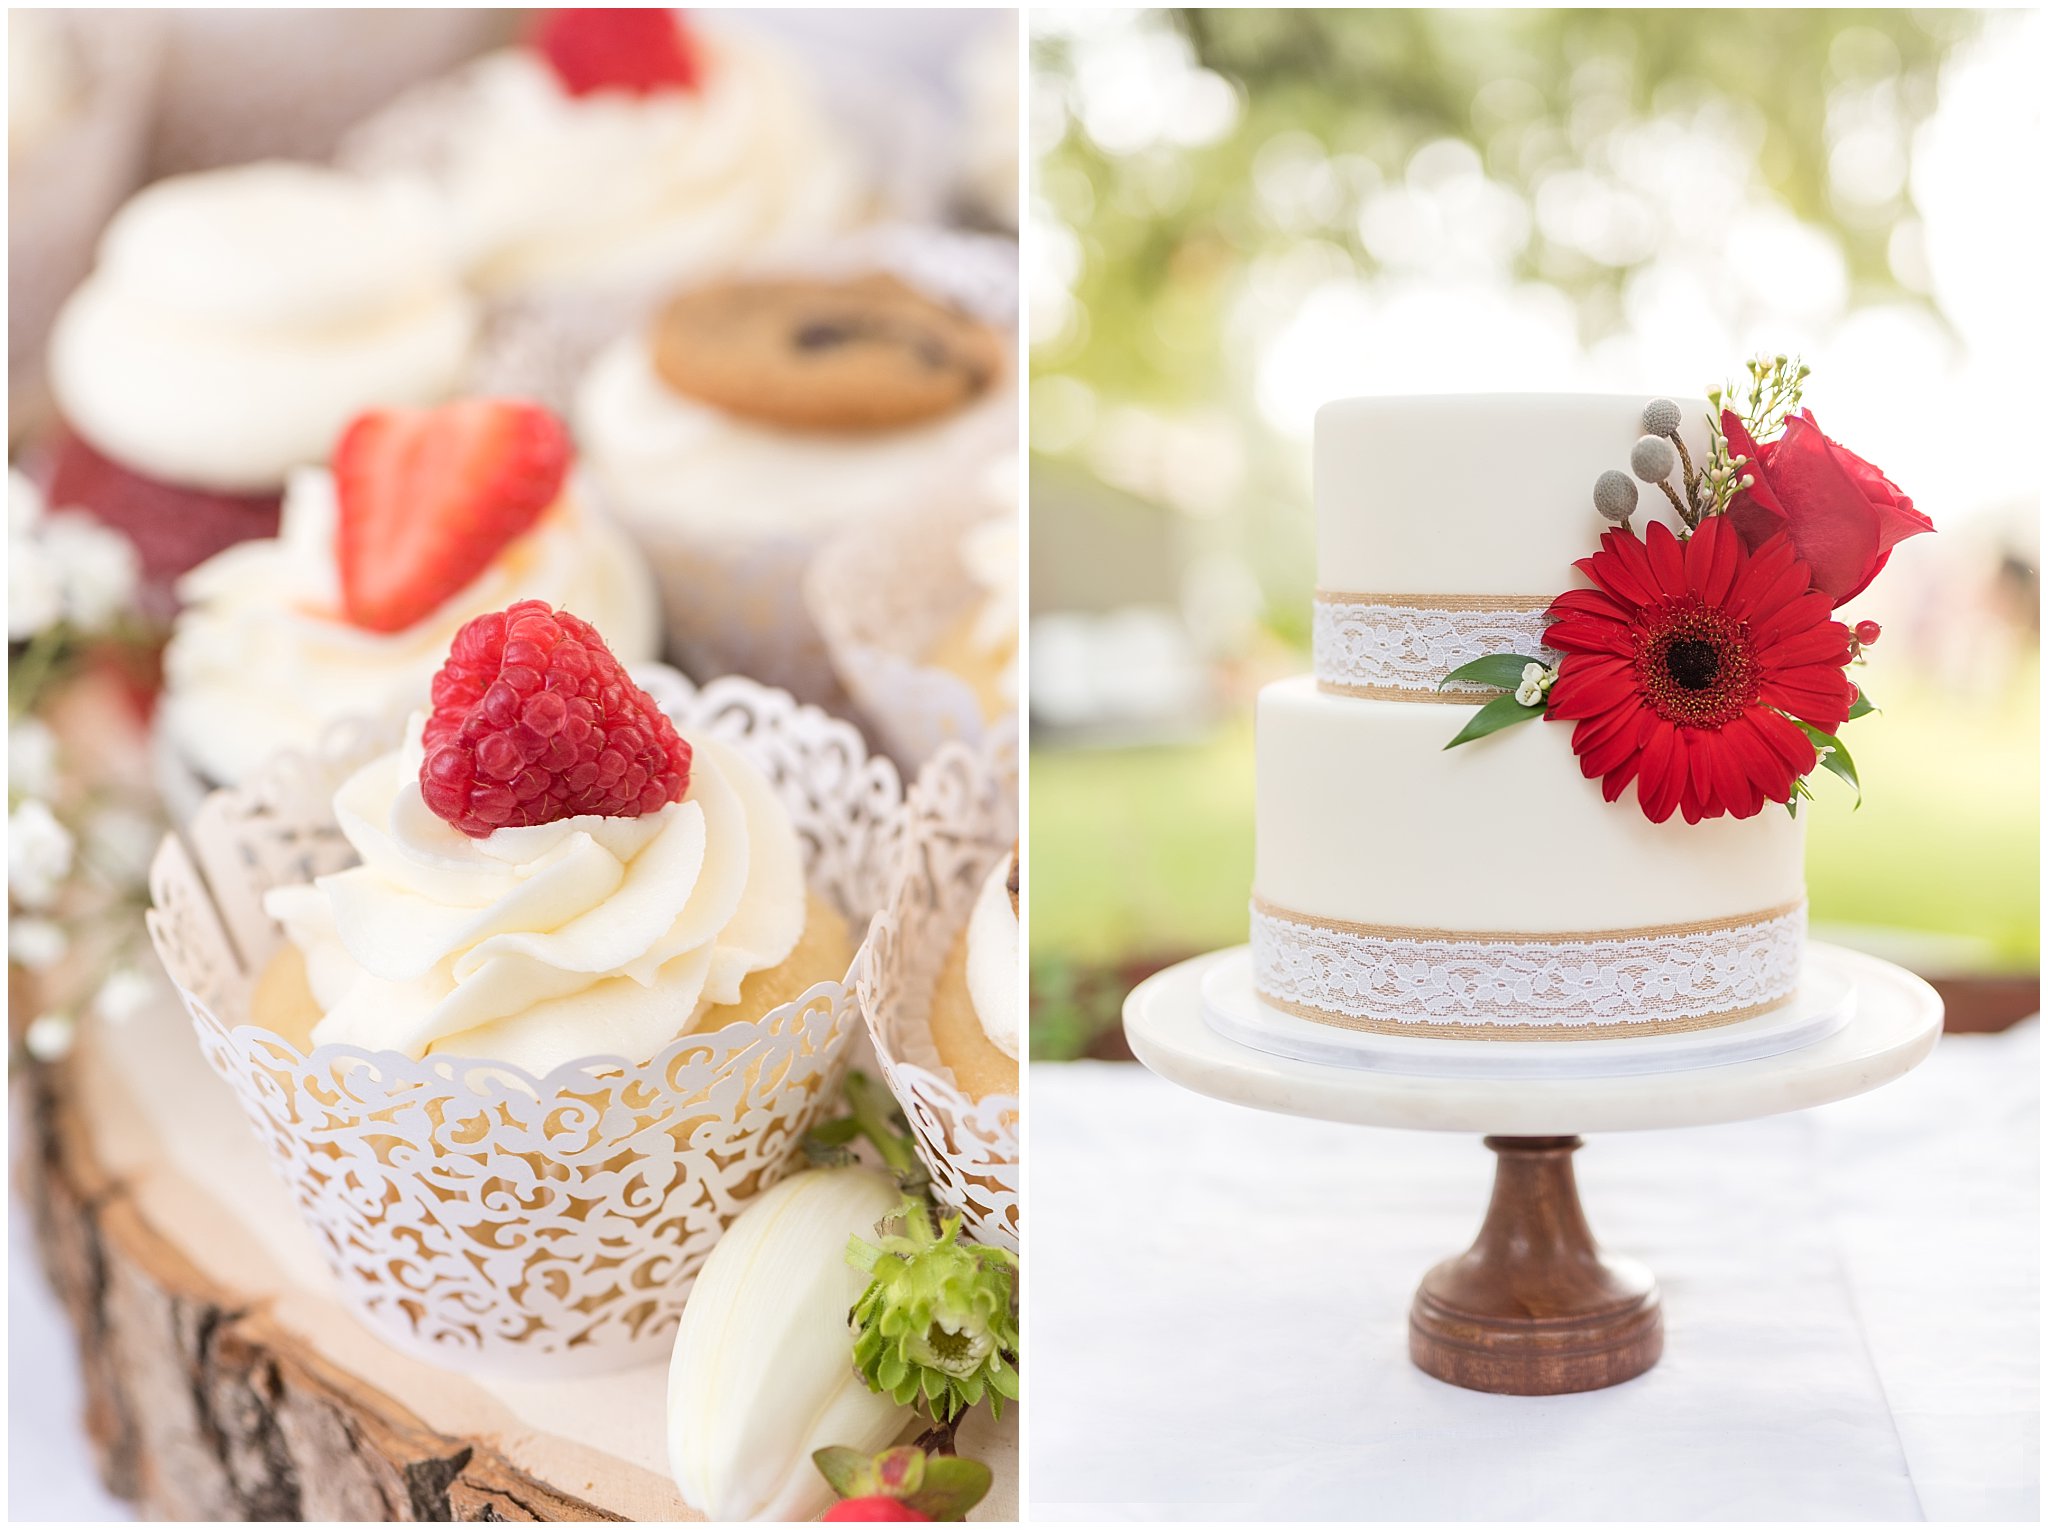 Davis County Utah Wedding | Sweet Cravings by Marcia cupcakes and cake | Jessie and Dallin Photography